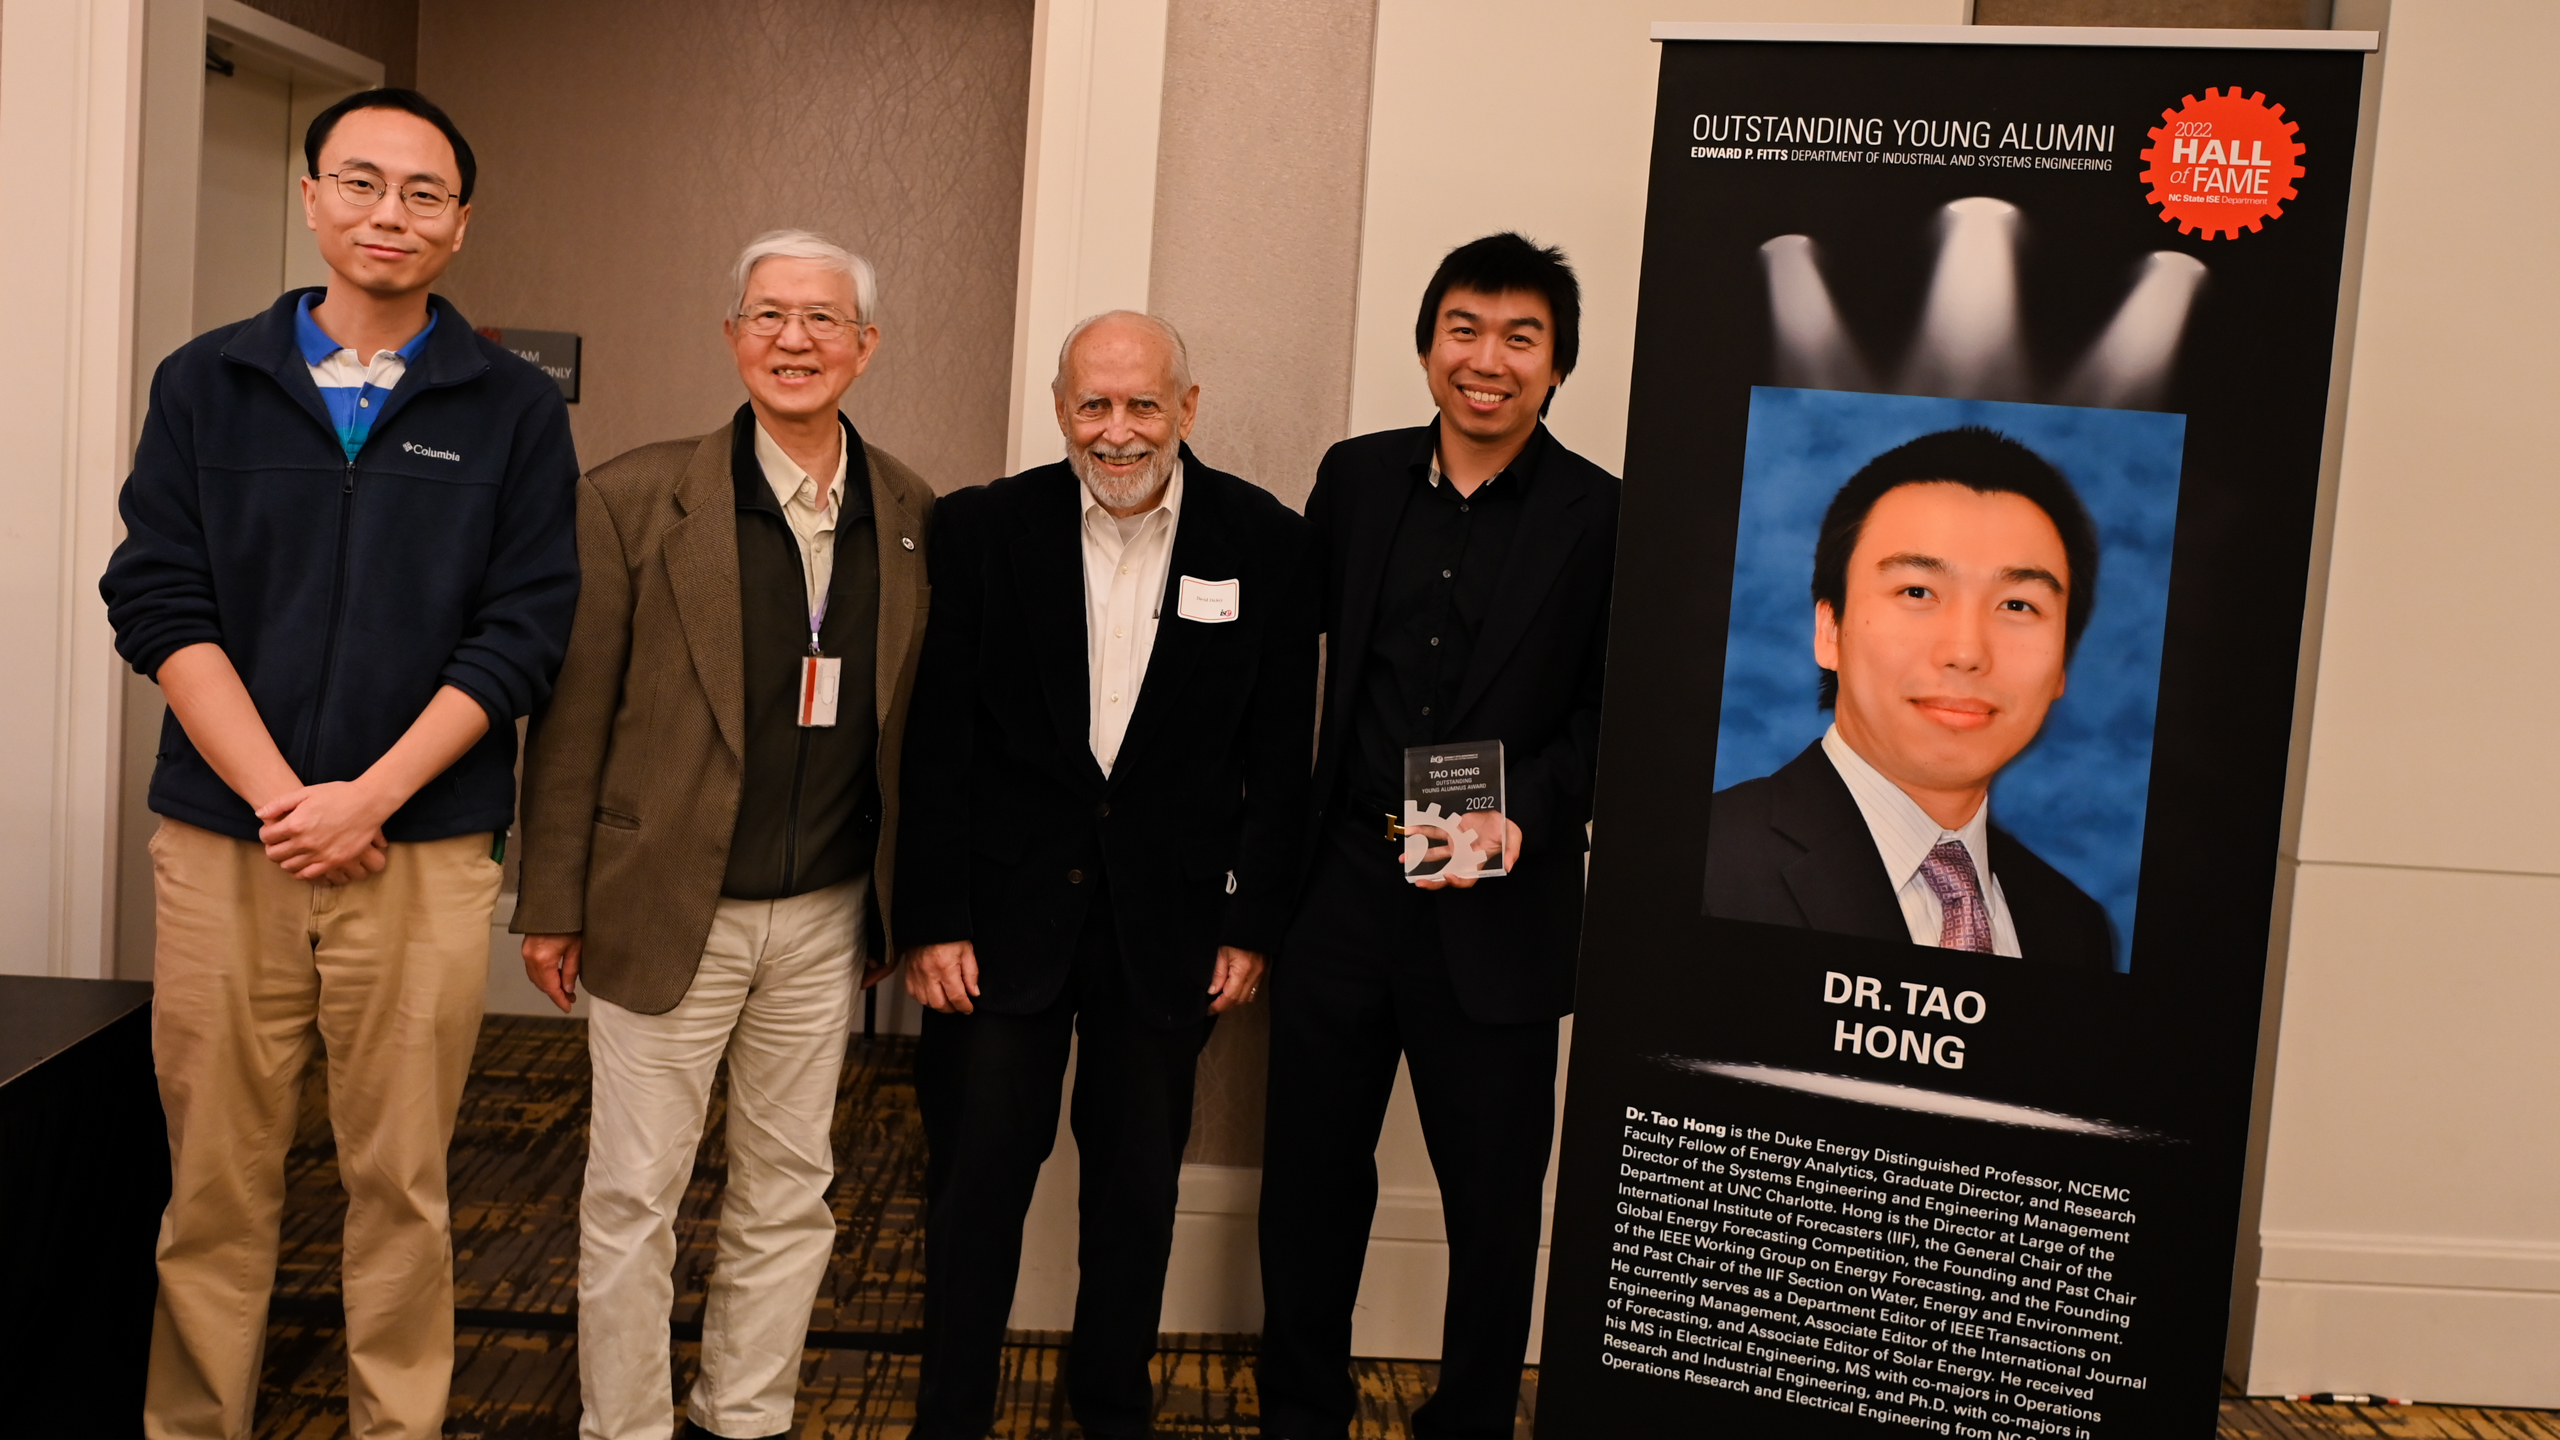 Dr. Tao Hong and faculty members posing in front of his Outstanding Young Alumni banner